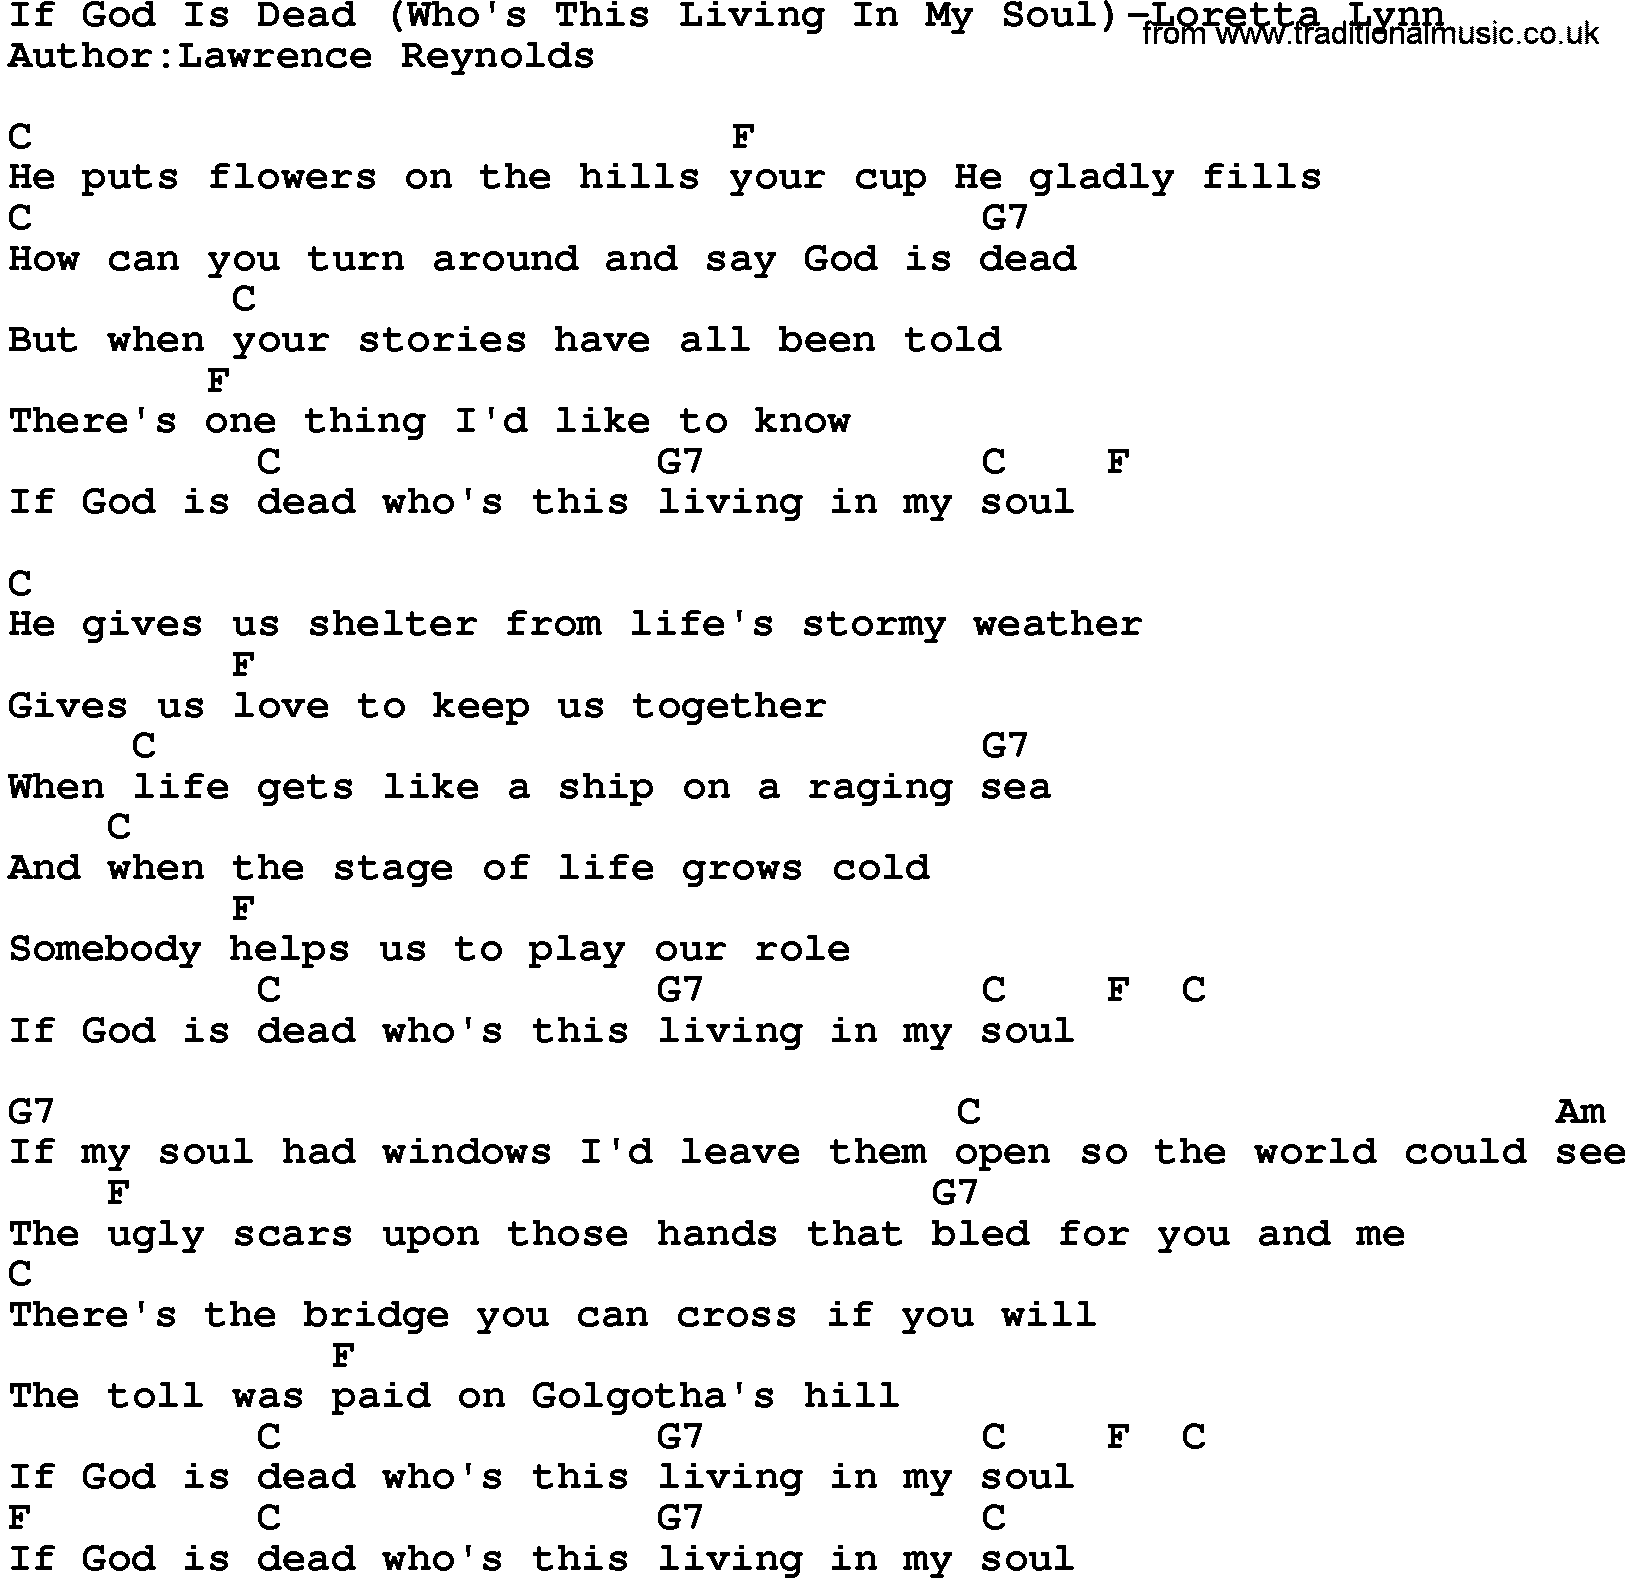 Country music song: If God Is Dead(Who's This Living In My Soul)-Loretta Lynn lyrics and chords